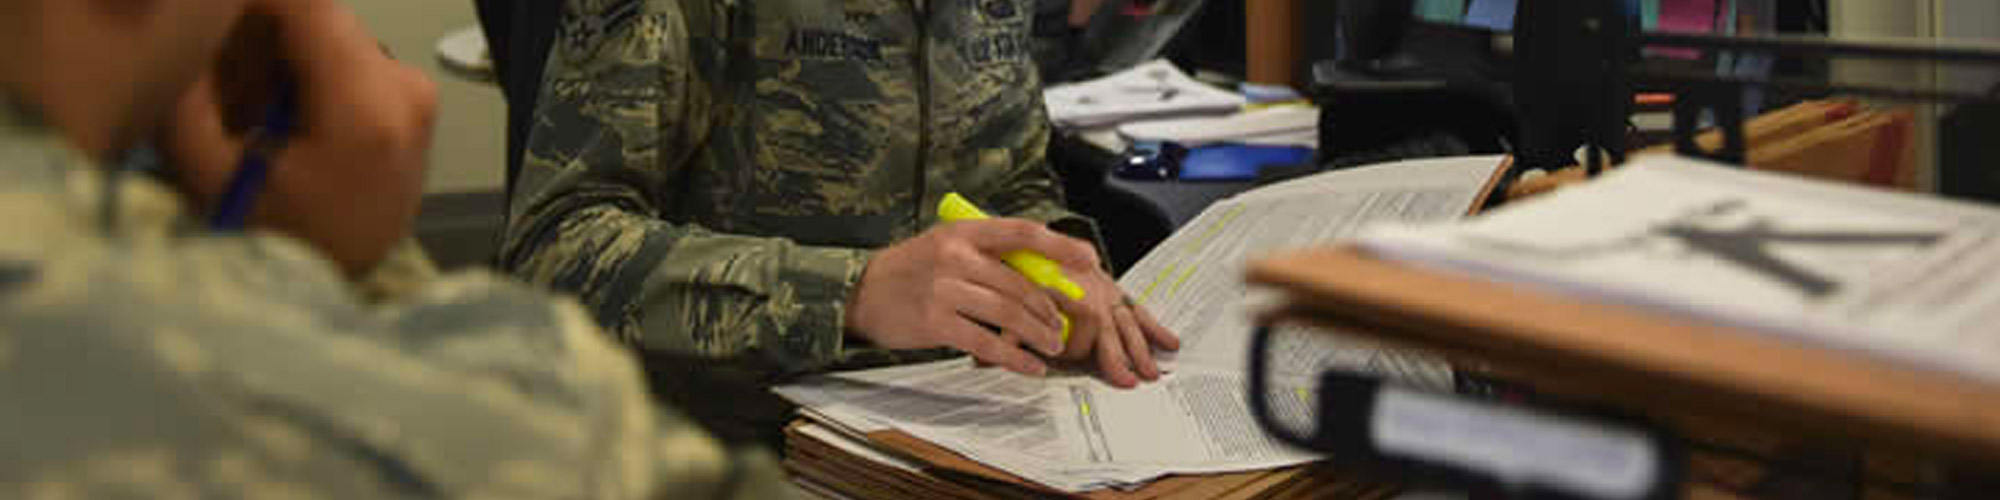 person in military uniform highlighting papers on a desk